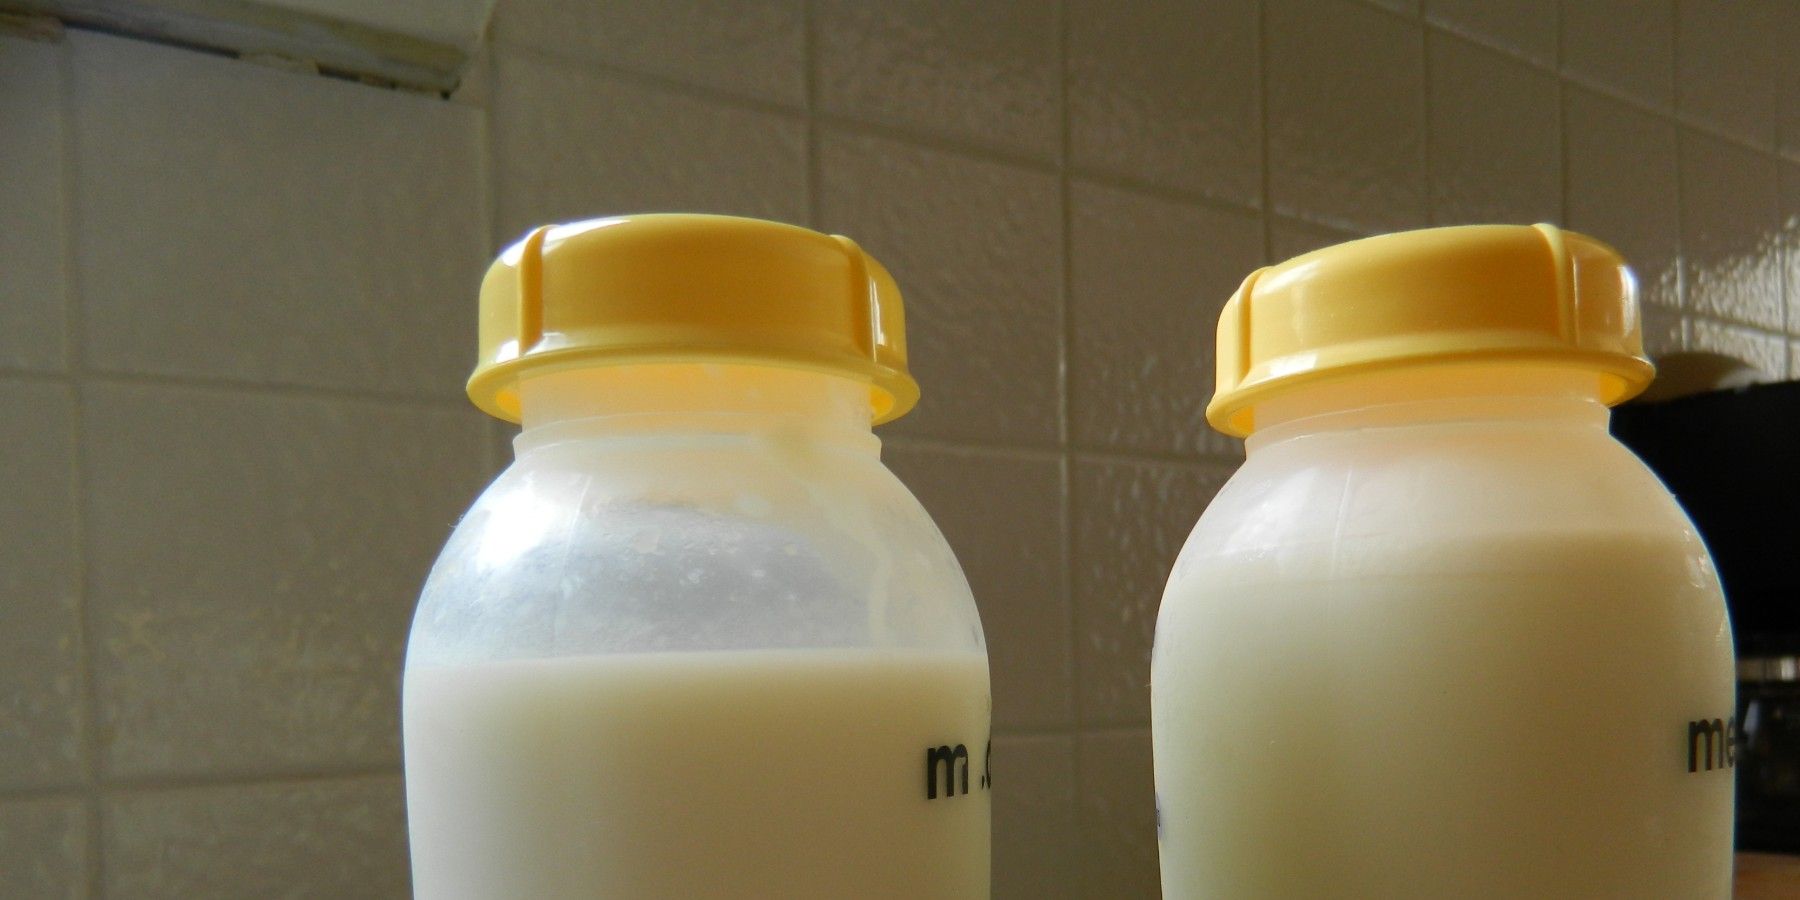 Bottles of milk, which might have been used to feed the world's longest breastfed baby.